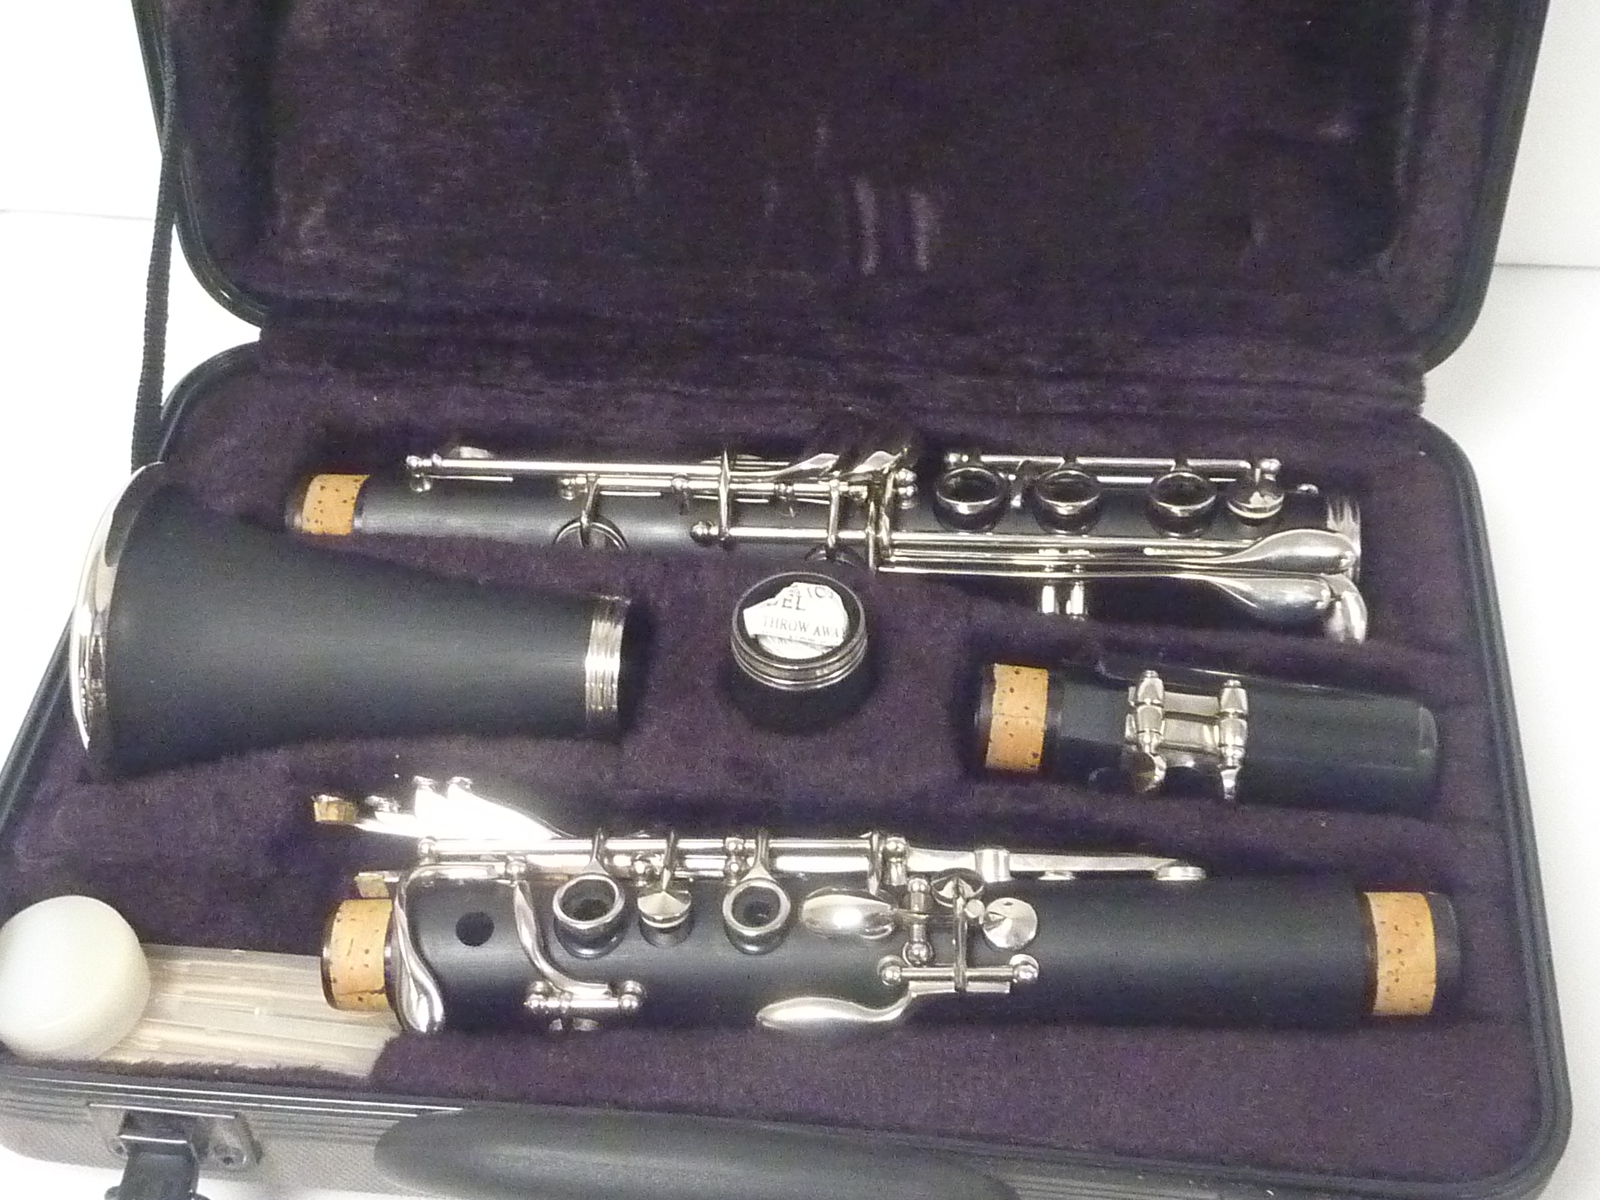 Venus student clarinet with black carry case.